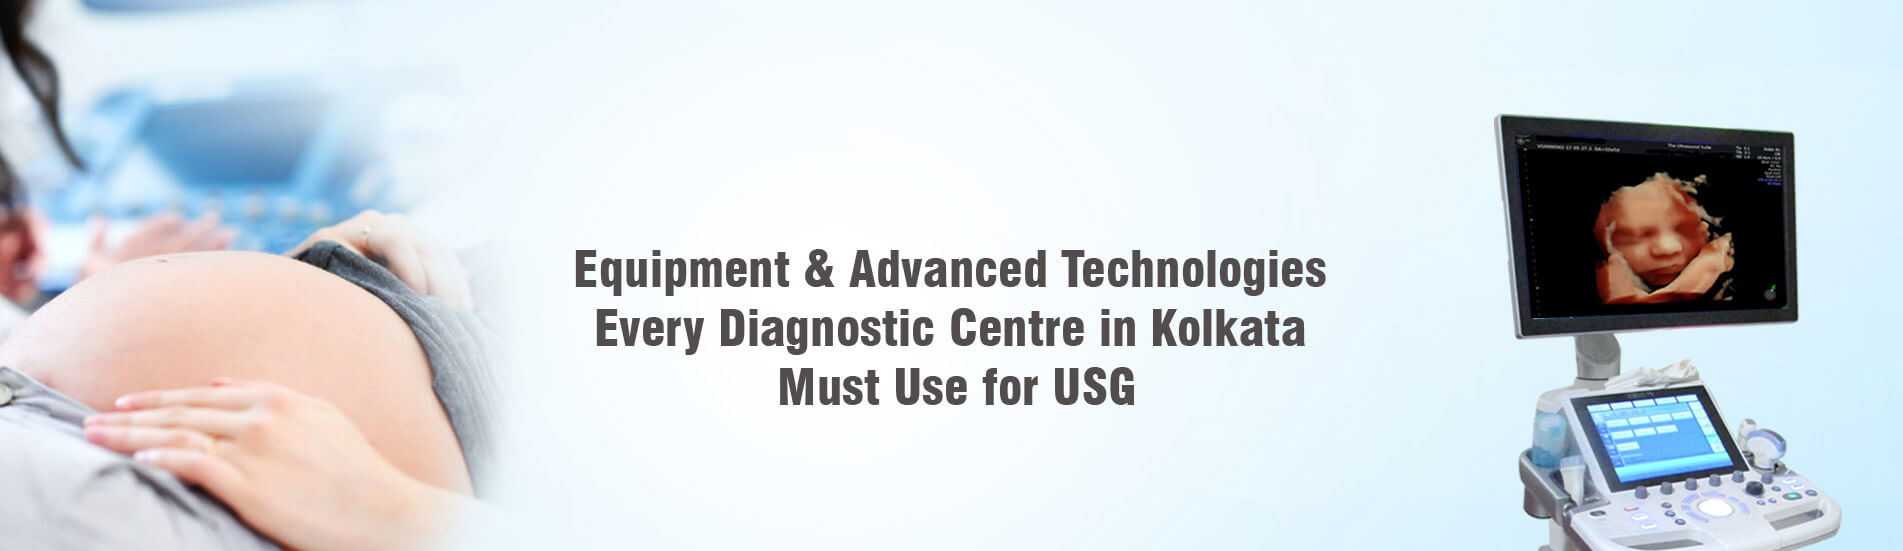 Equipment & Advanced Technologies Every Diagnostic Centre in Kolkata Must Use for USG